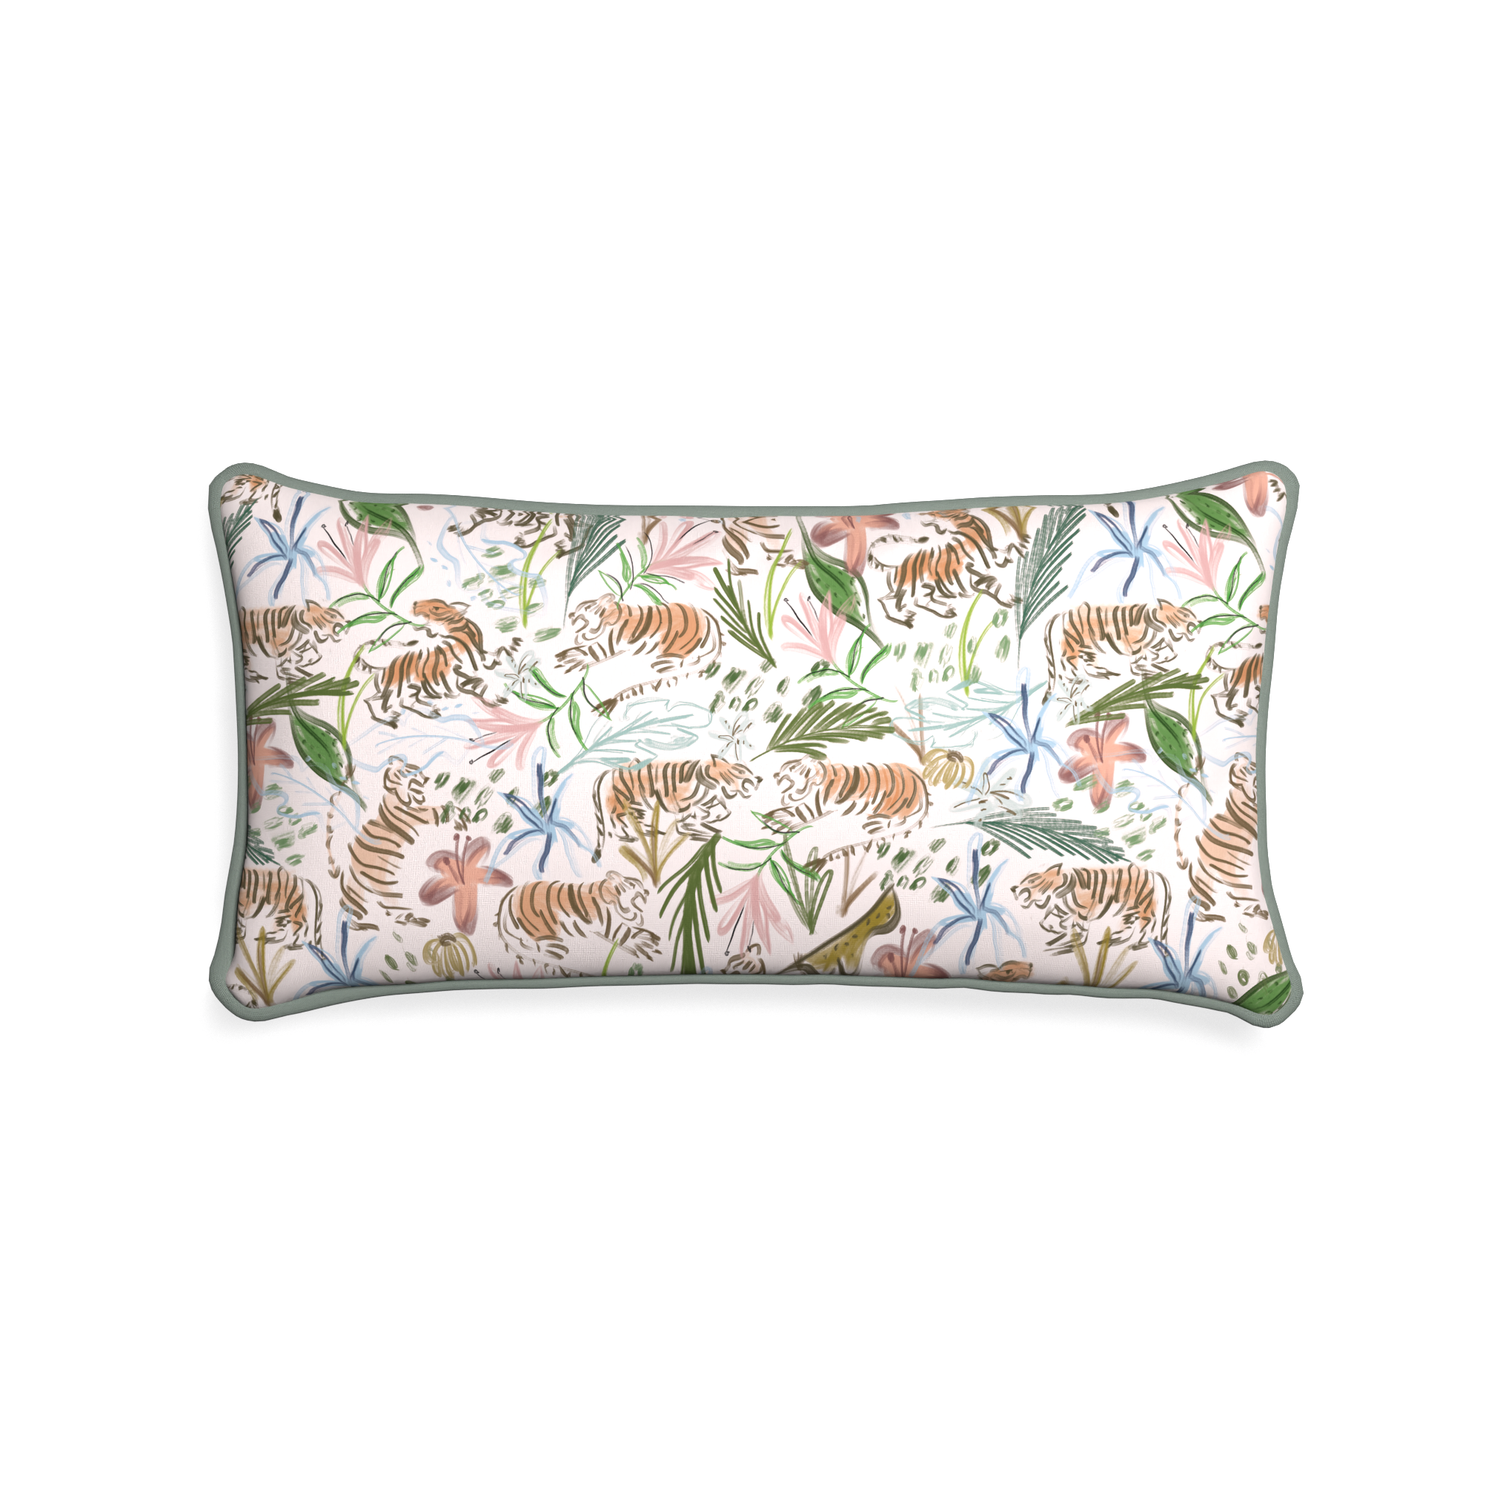 Midi-lumbar frida pink custom pink chinoiserie tigerpillow with sage piping on white background